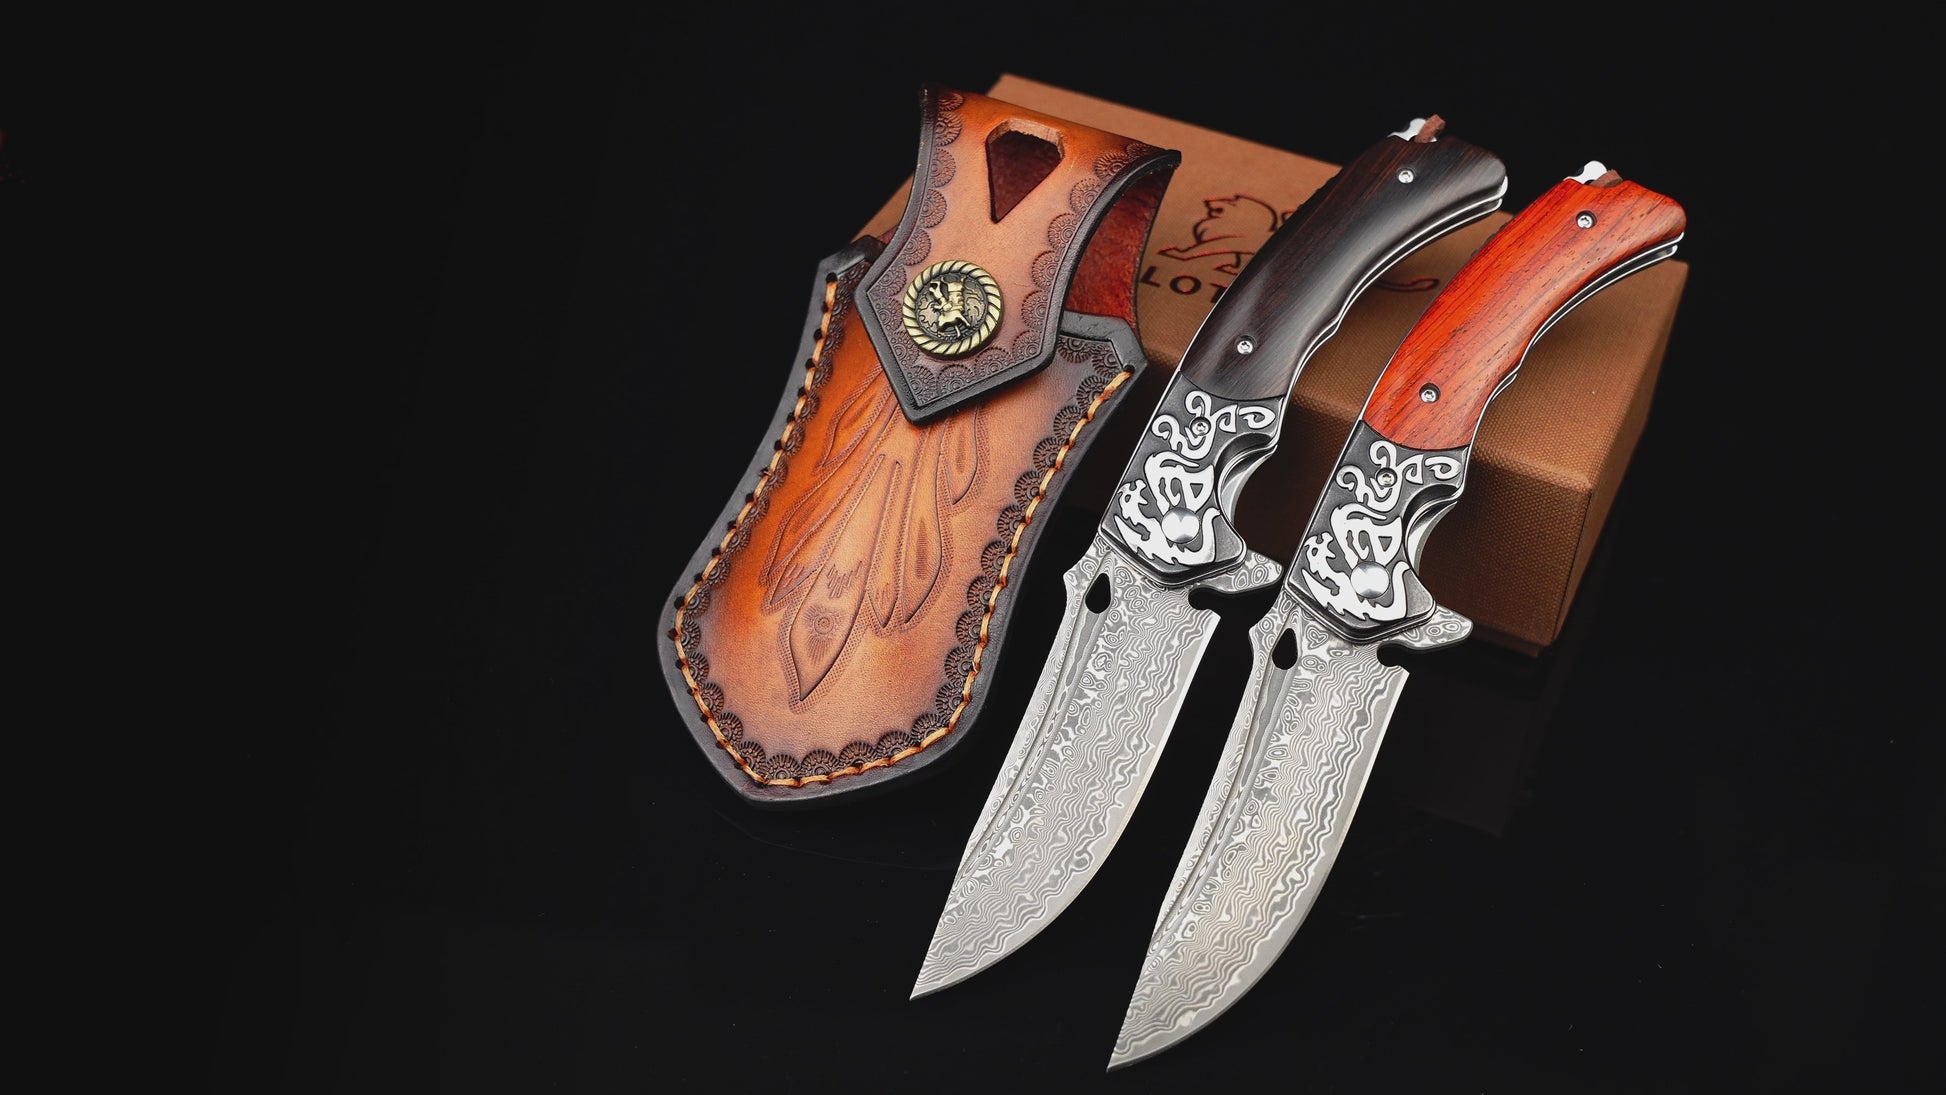 Crafted Custom Damascus Steel Pocket Knife Gift Set with Gift Box